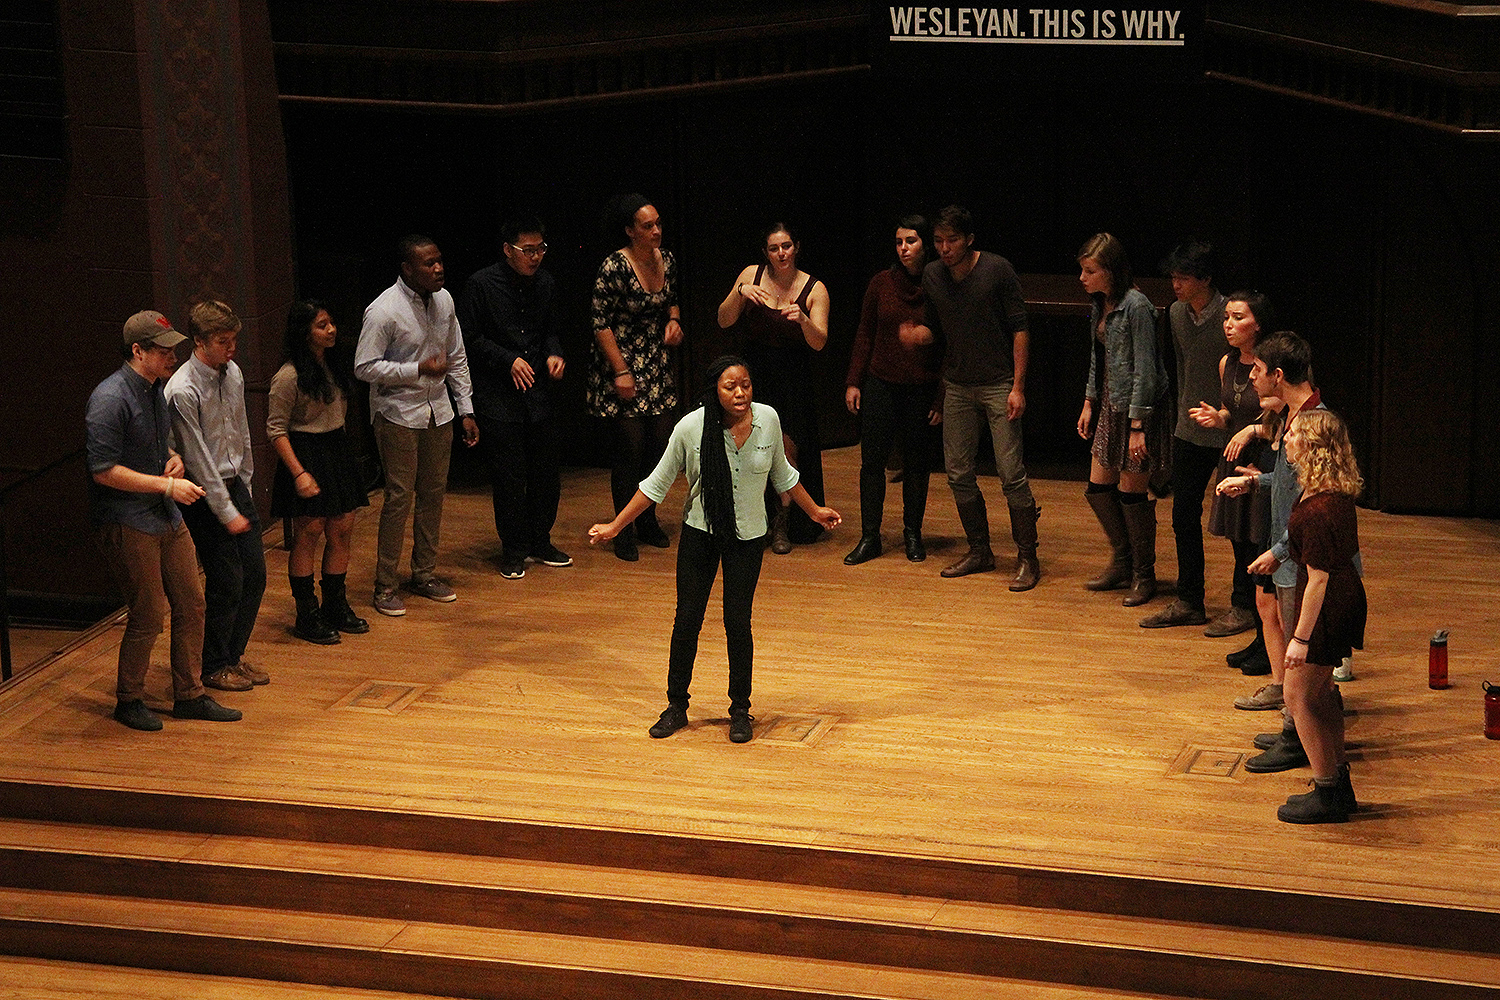 The 5th Annual Stone A Cappella Concert at Memorial Chapel on Nov. 8 featured the vocal talent of Wesleyan's many student a capella groups. (Photo by Rebecca Goldfarb Terry ’19)